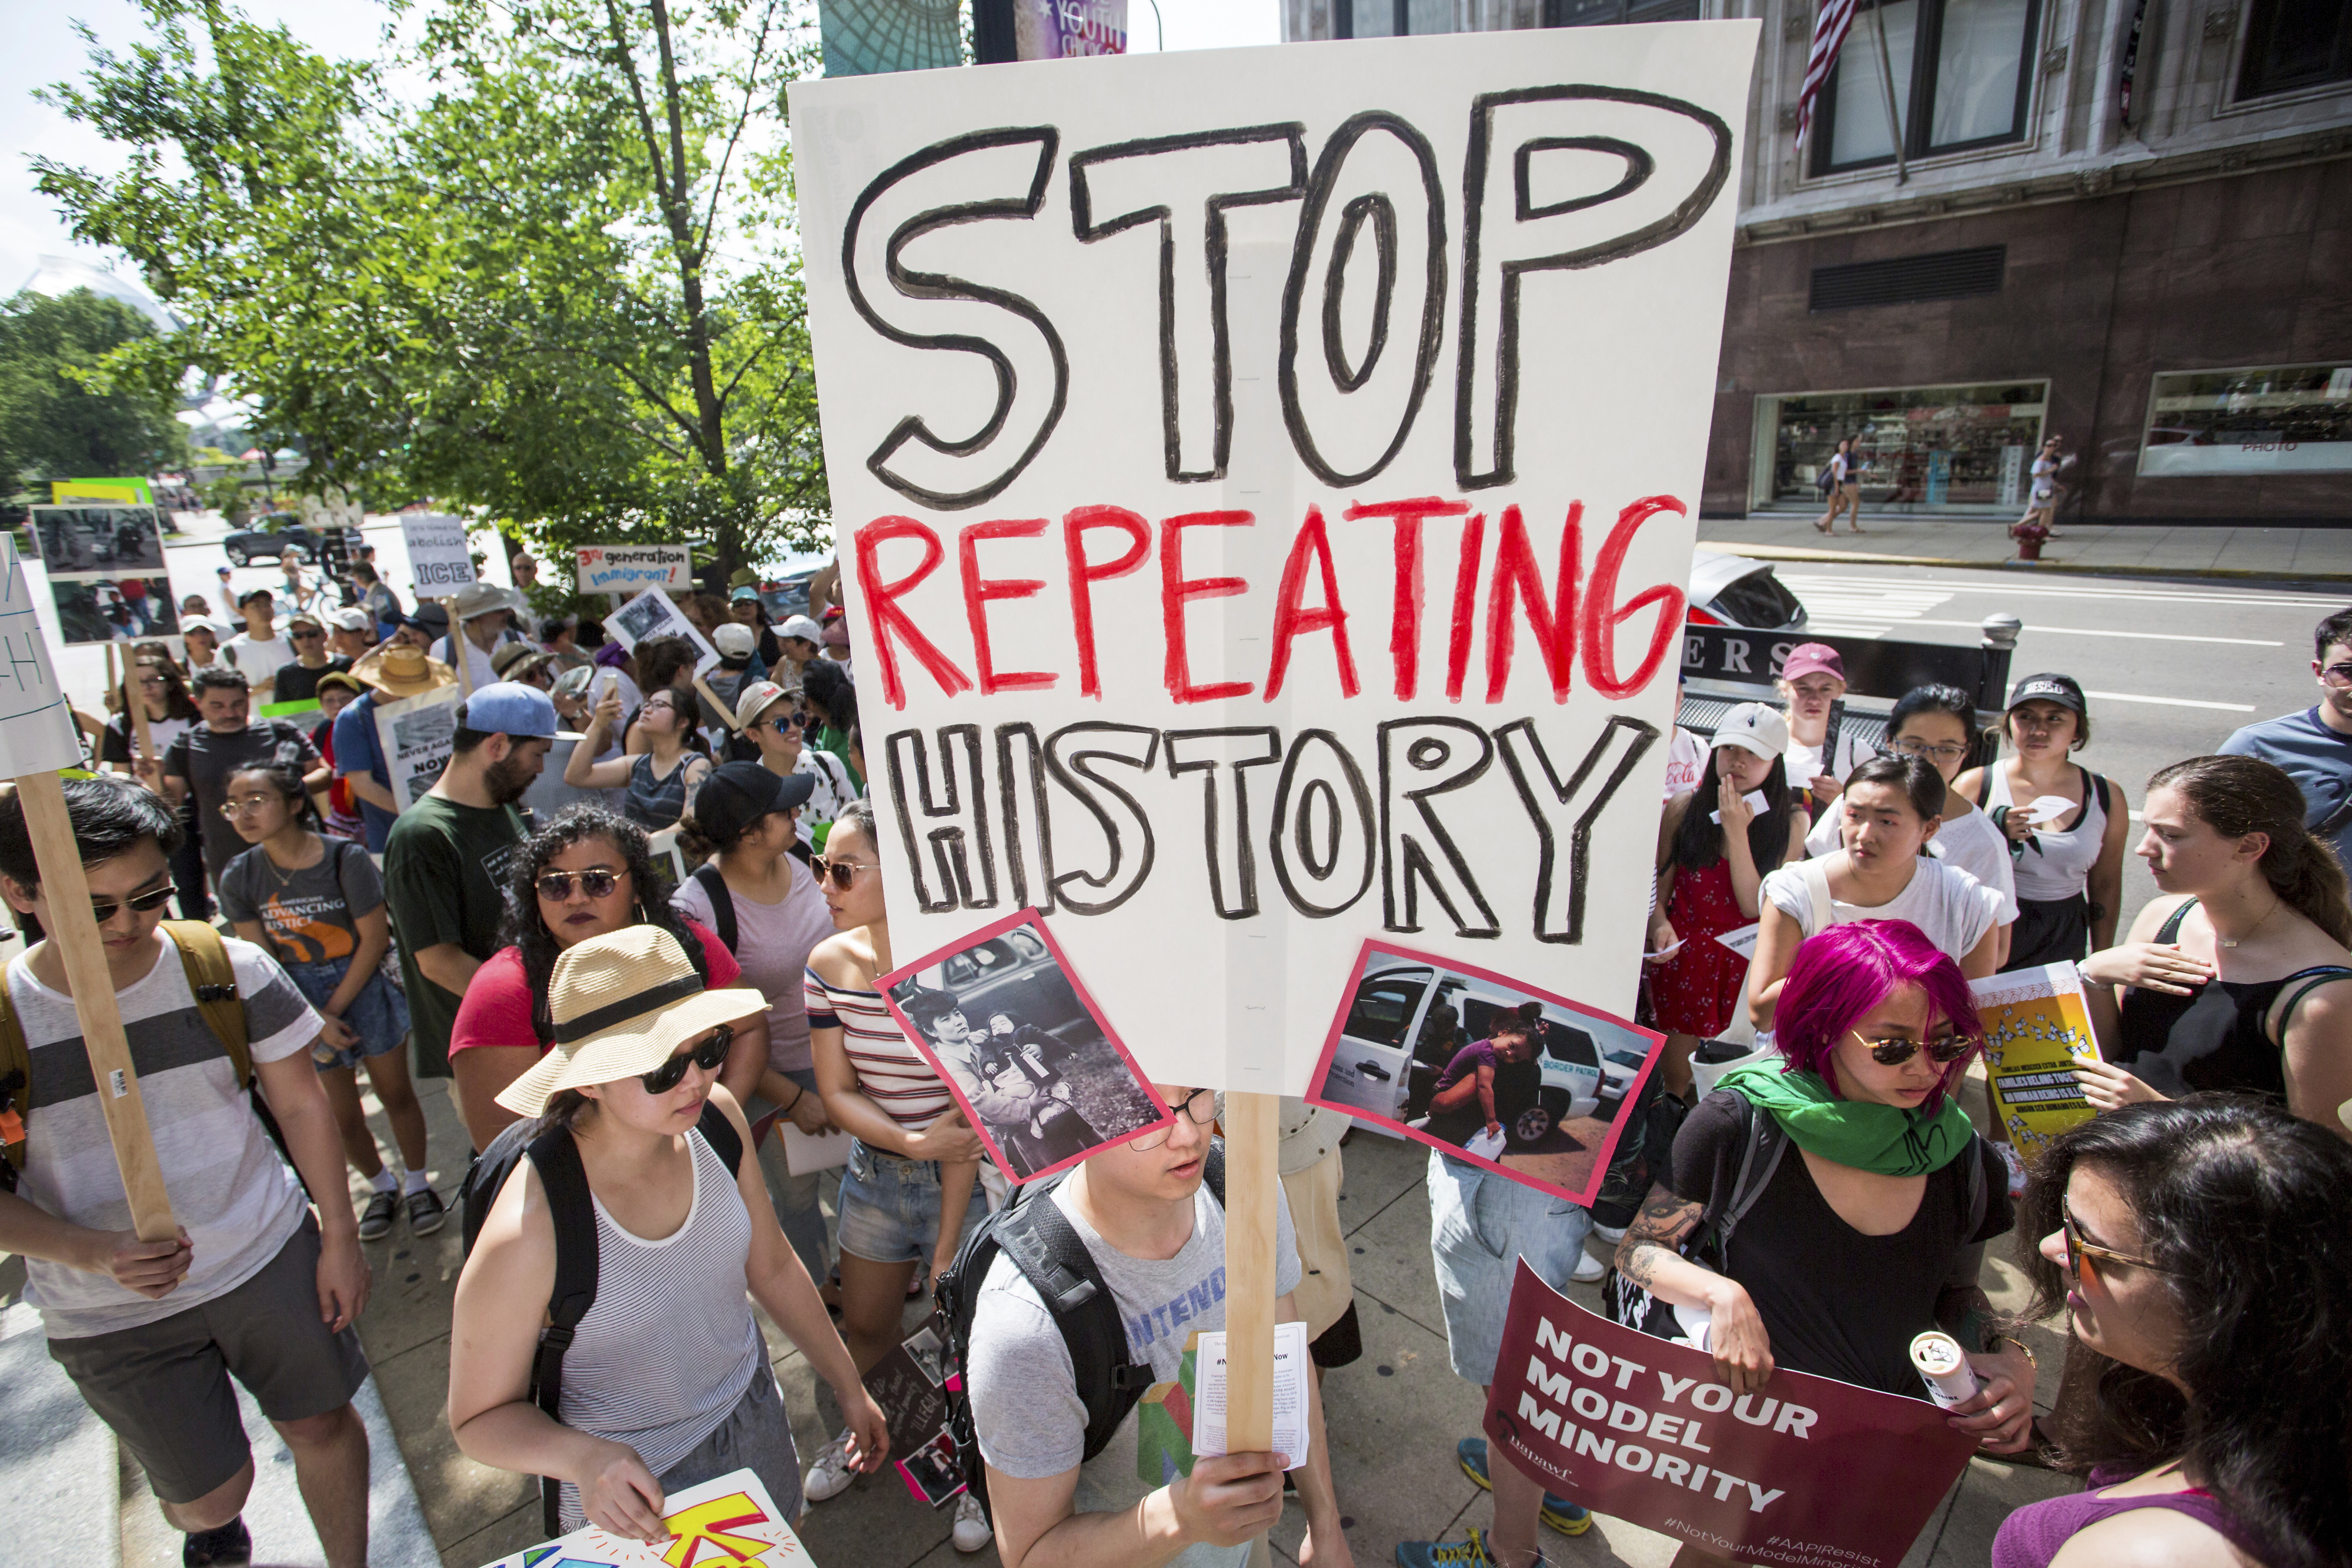 A consortium of Asian-American groups brought together by the Japanese-American Service Community participate in the Families Belong Together march in Chicago on Saturday, June 30, 2018. In major cities and tiny towns, marchers gathered across America, moved by accounts of children separated from their parents at the U.S.-Mexico border, in the latest act of mass resistance against President Donald Trump's immigration policies. (James Foster/Chicago Sun-Times via AP)